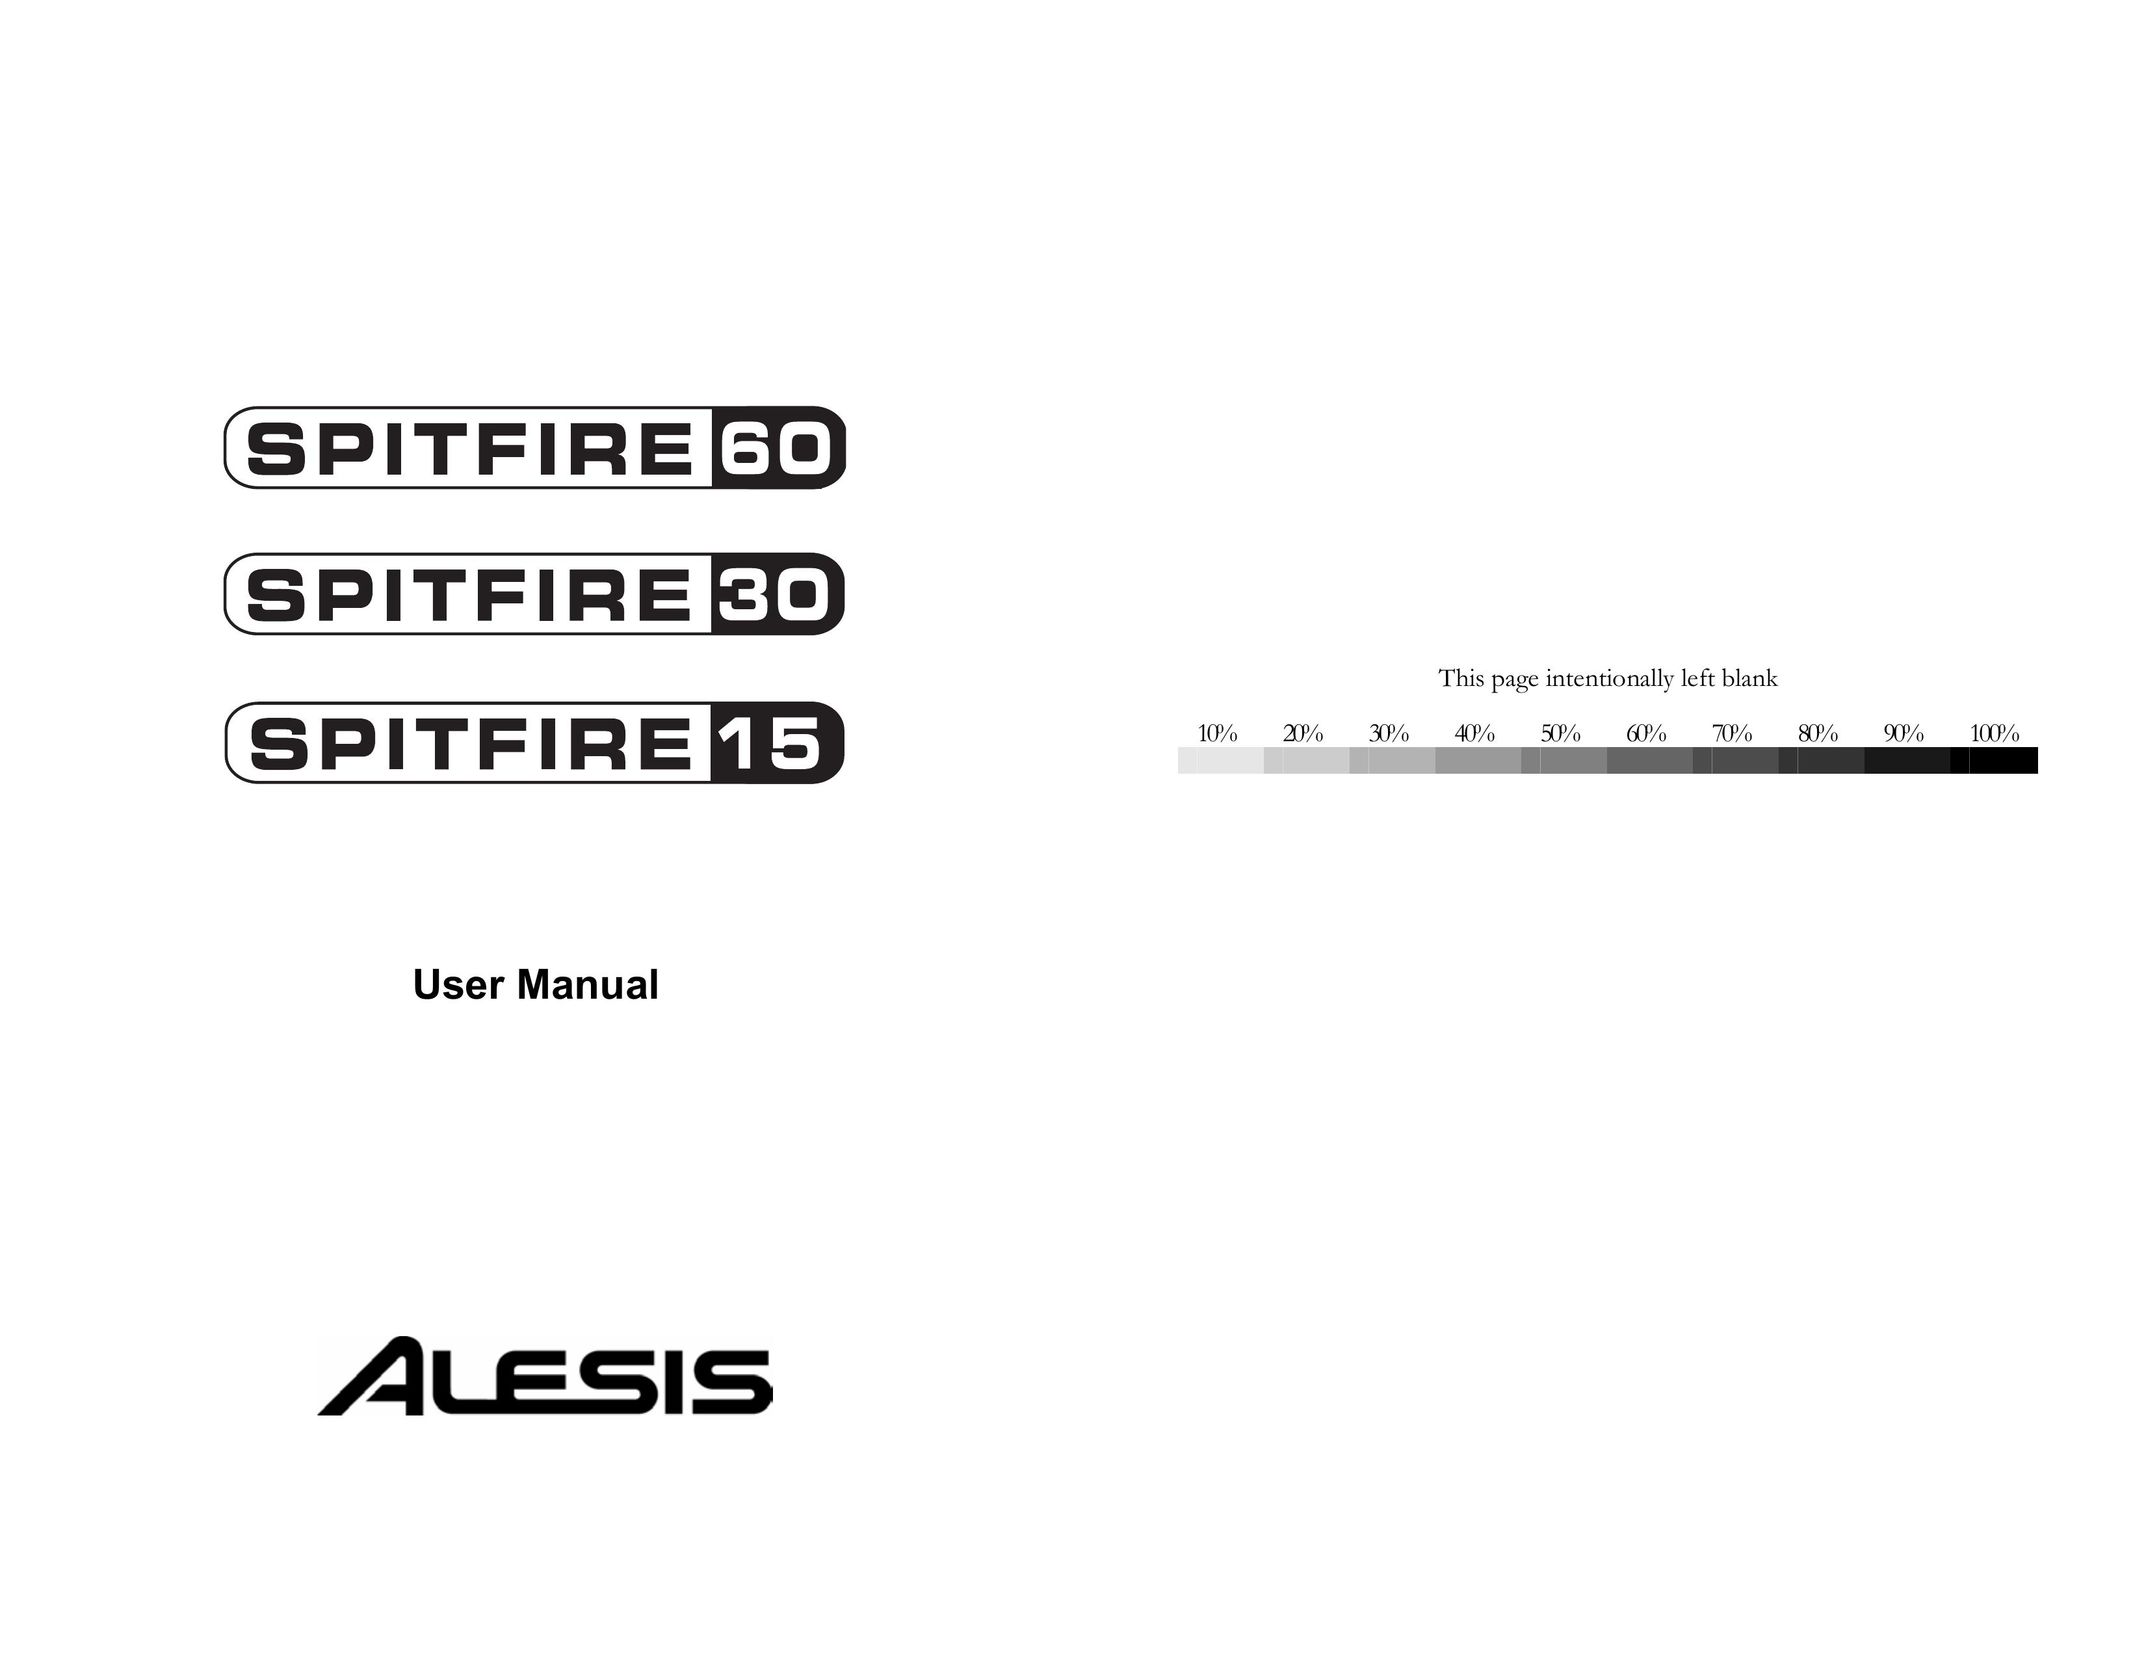 Alesis Spitfire 60 Stereo Amplifier User Manual (Page 1)